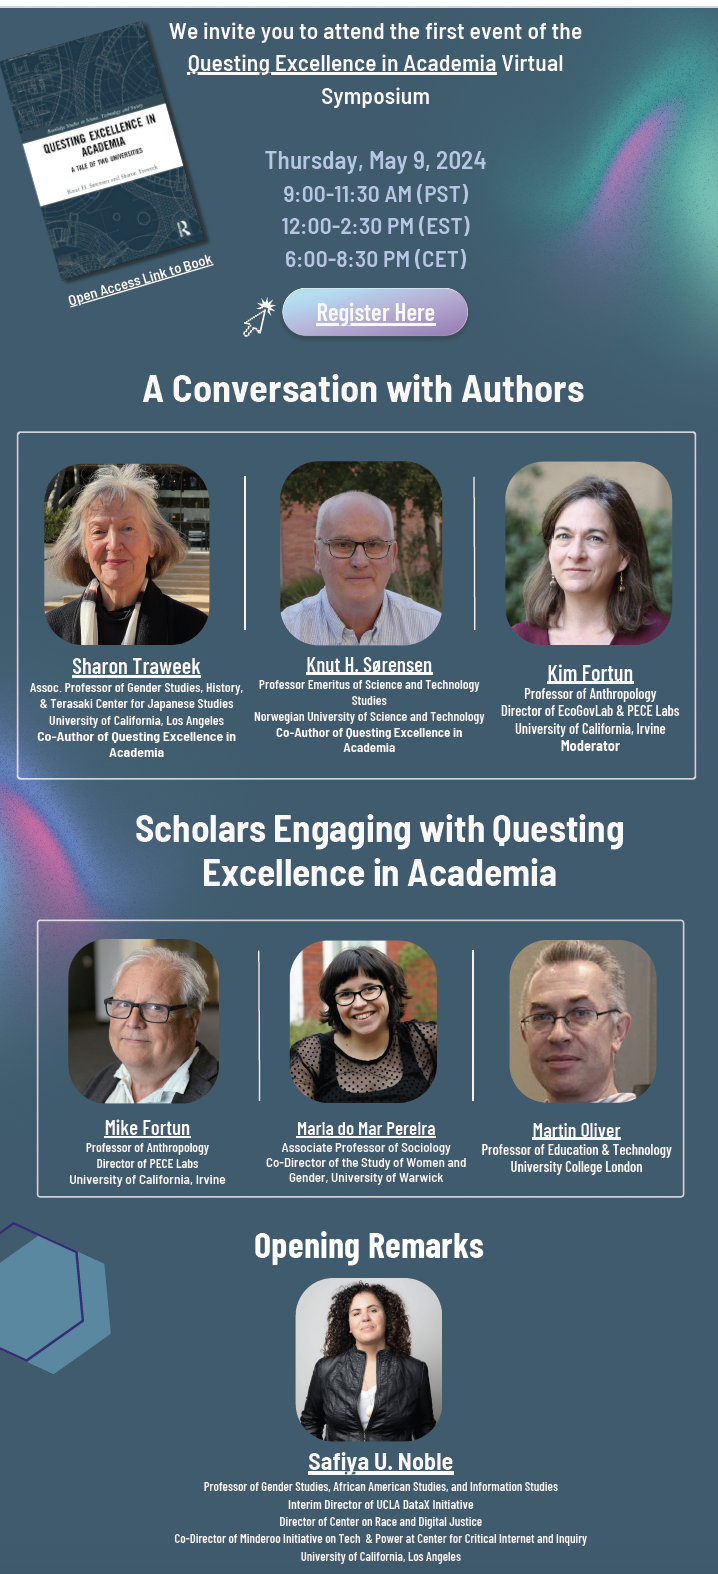 Virtual Symposium on Questing Excellence in Academia 